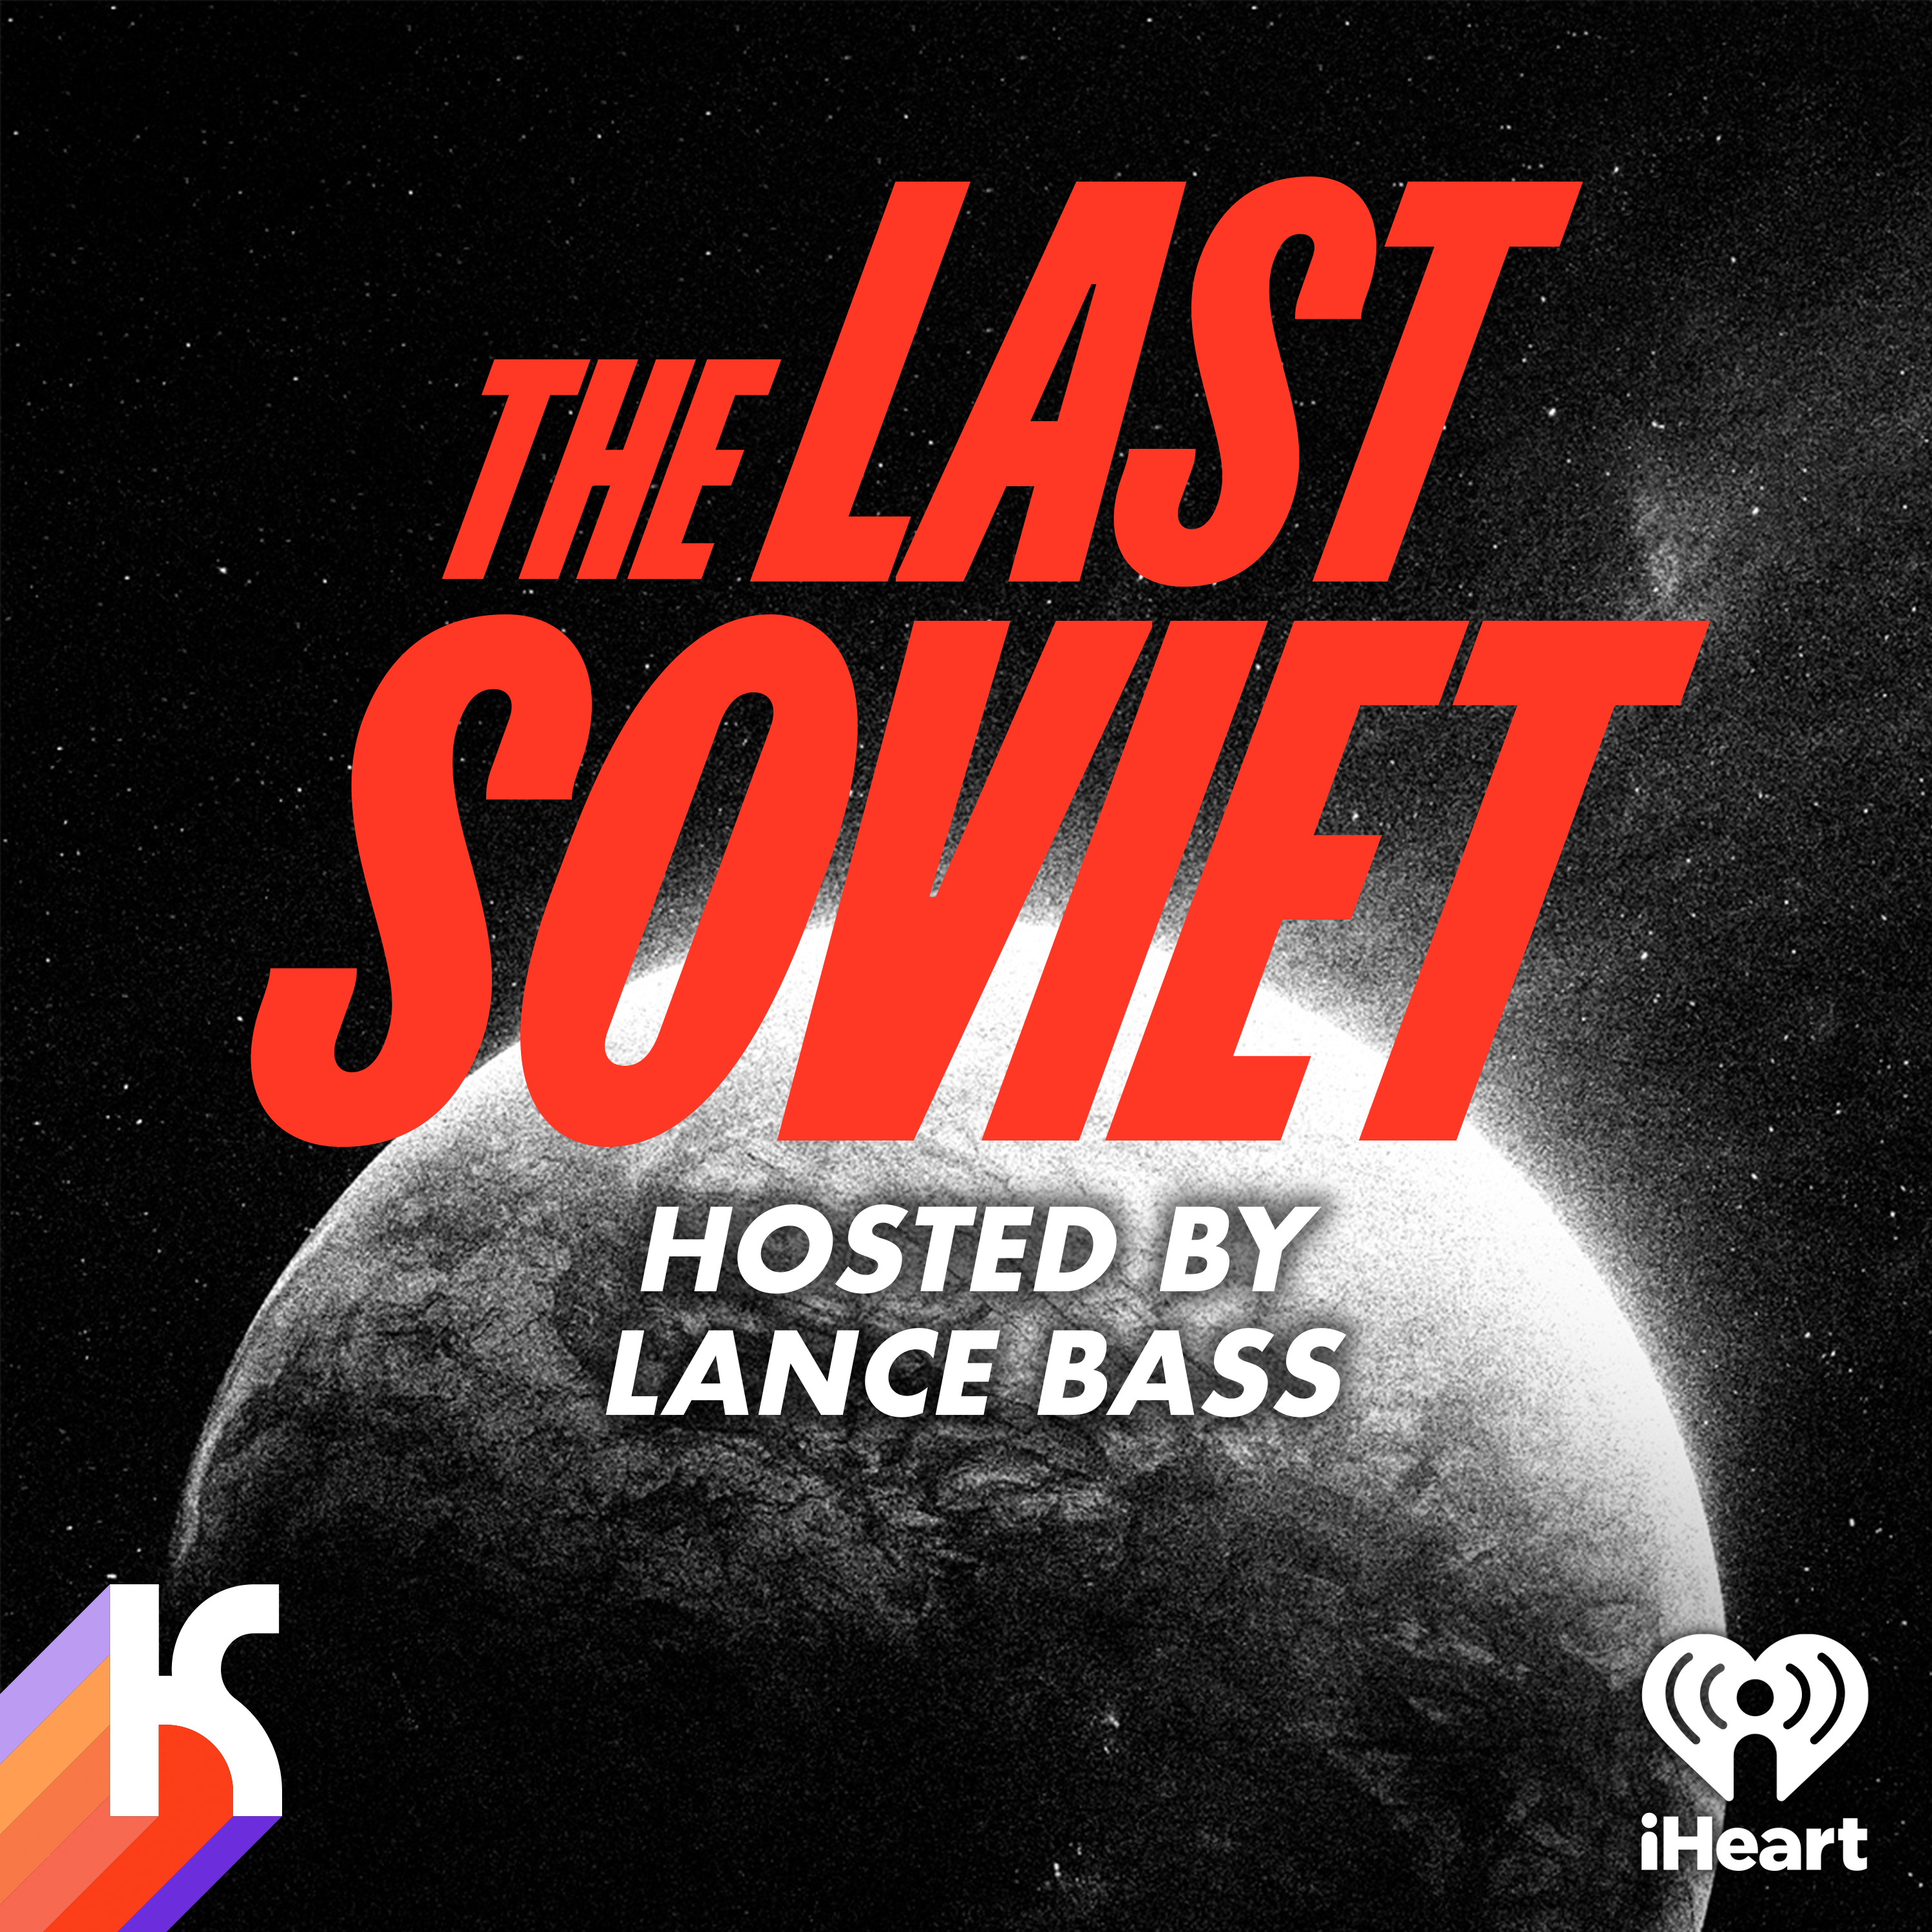 THE LAST SOVIET - EP 6: Pioneers and Pirates